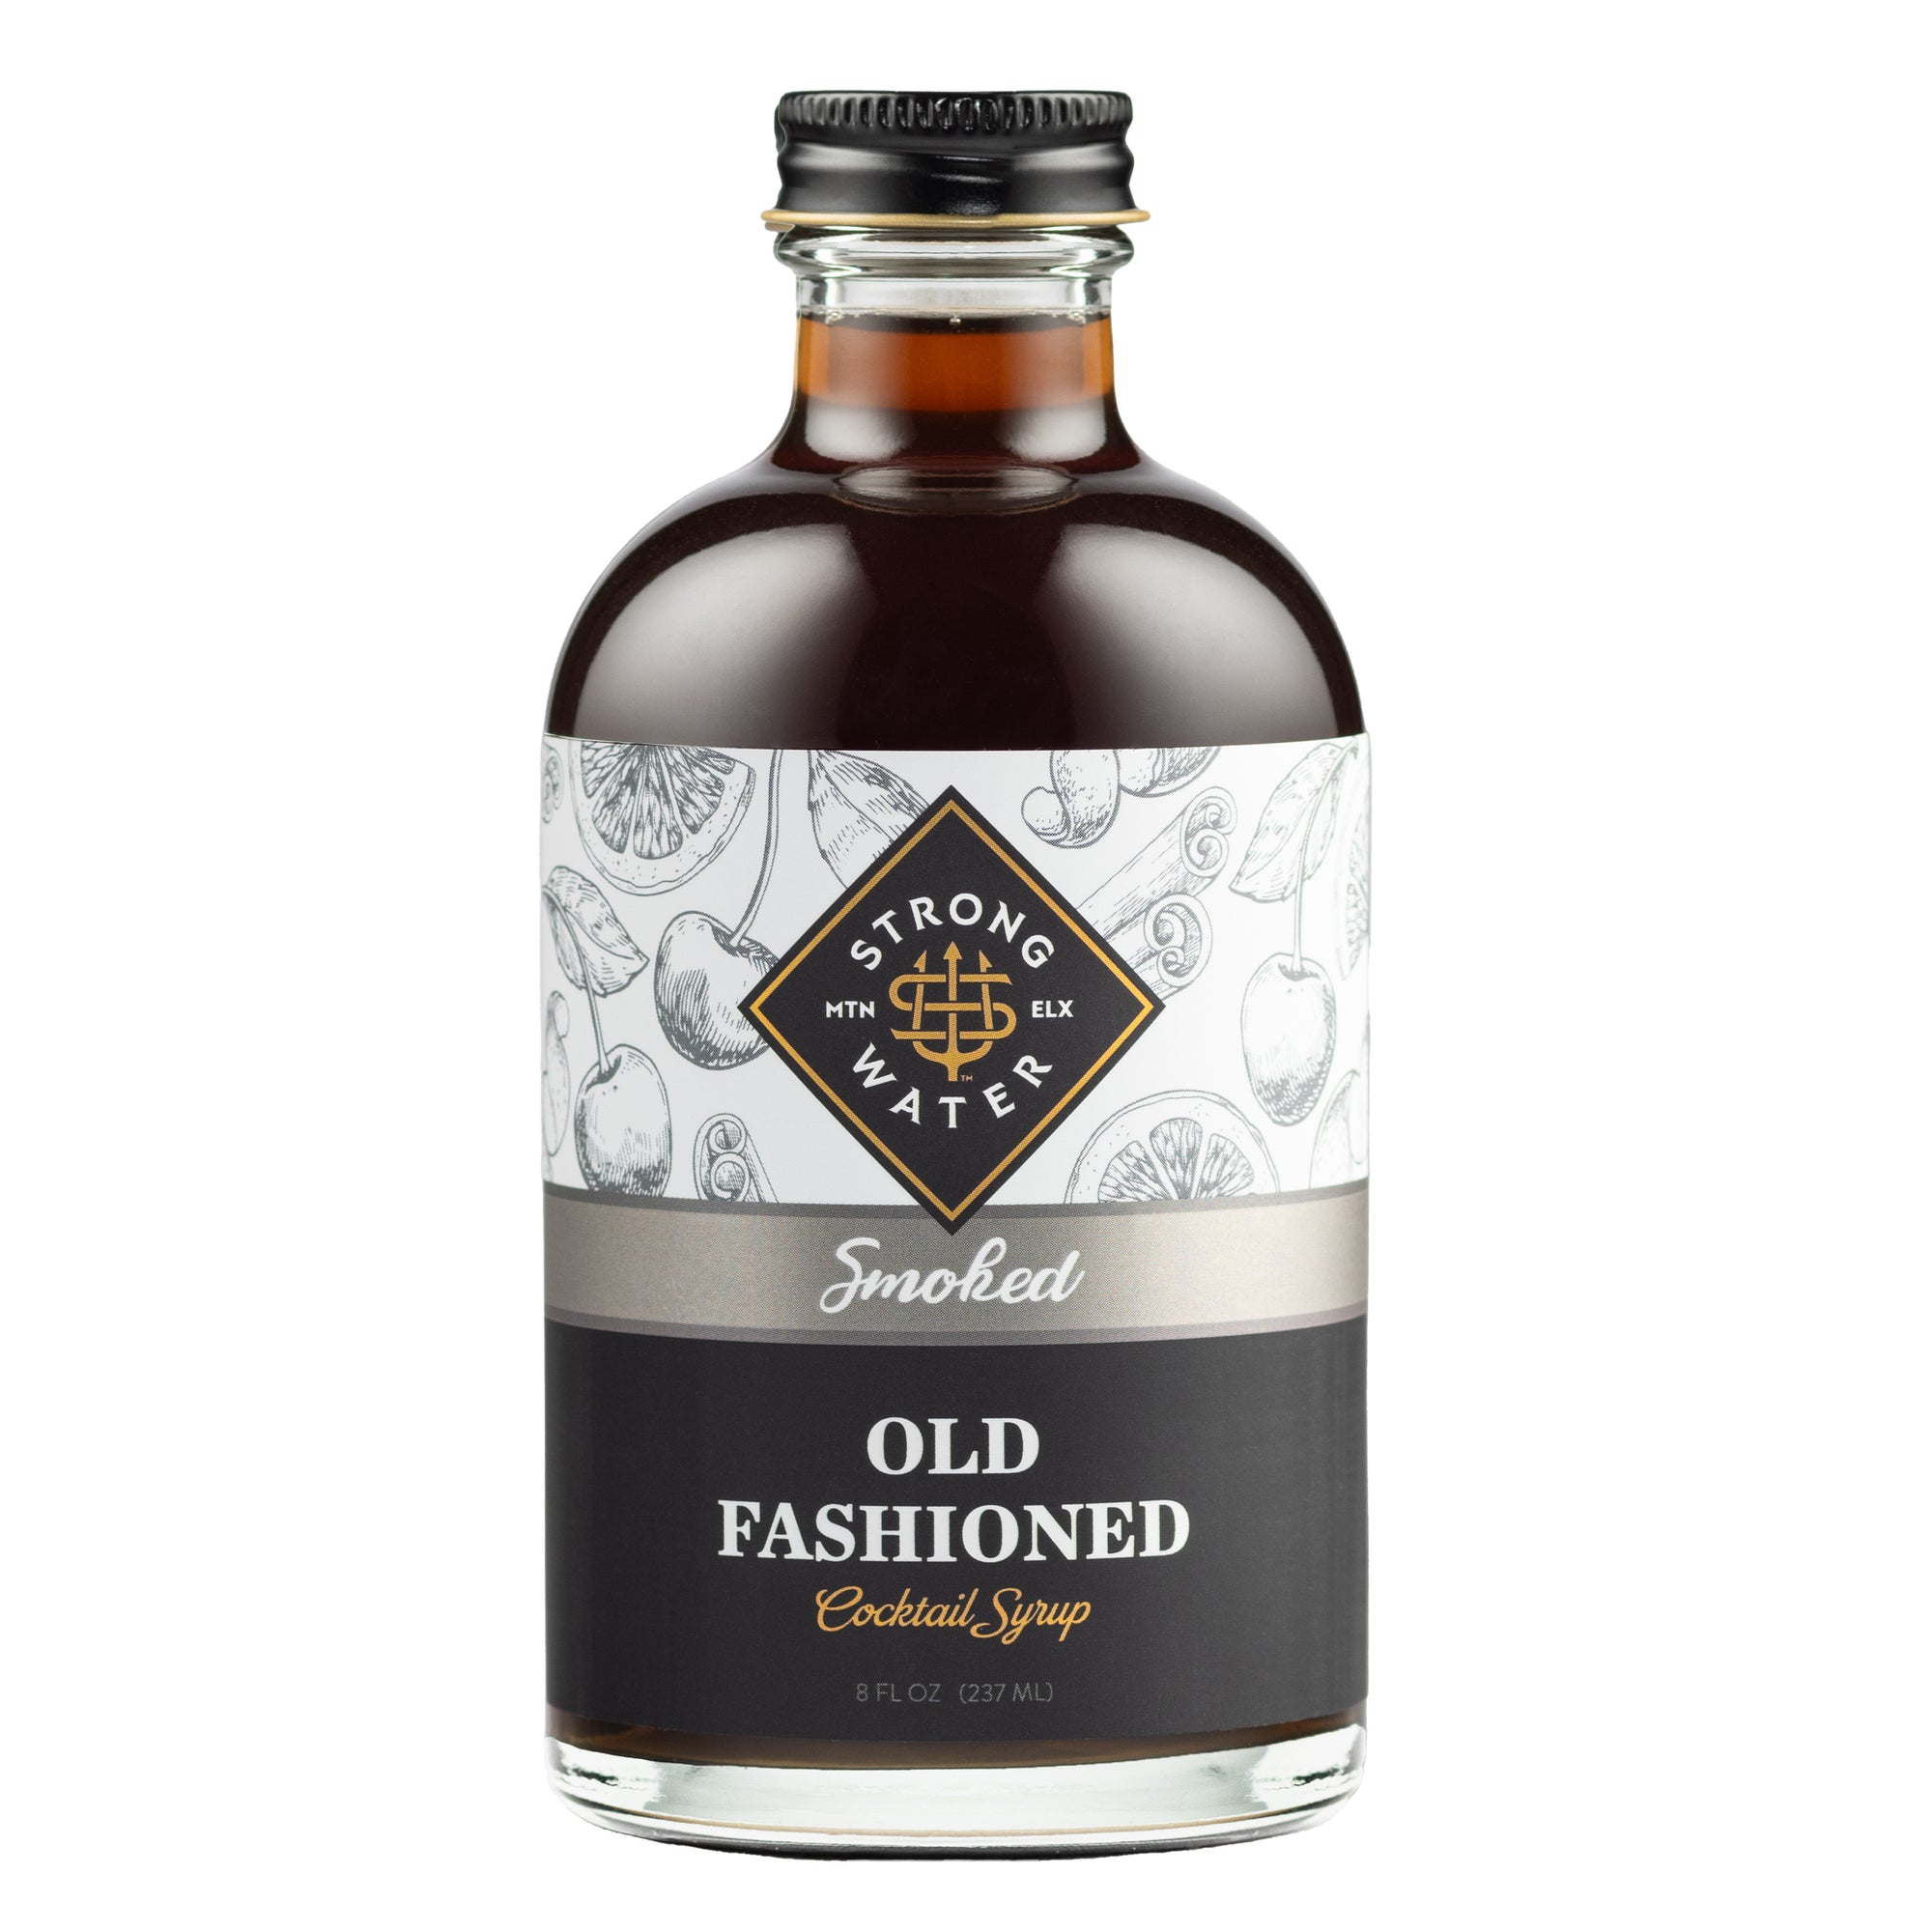 SMOKED Old Fashioned Syrup